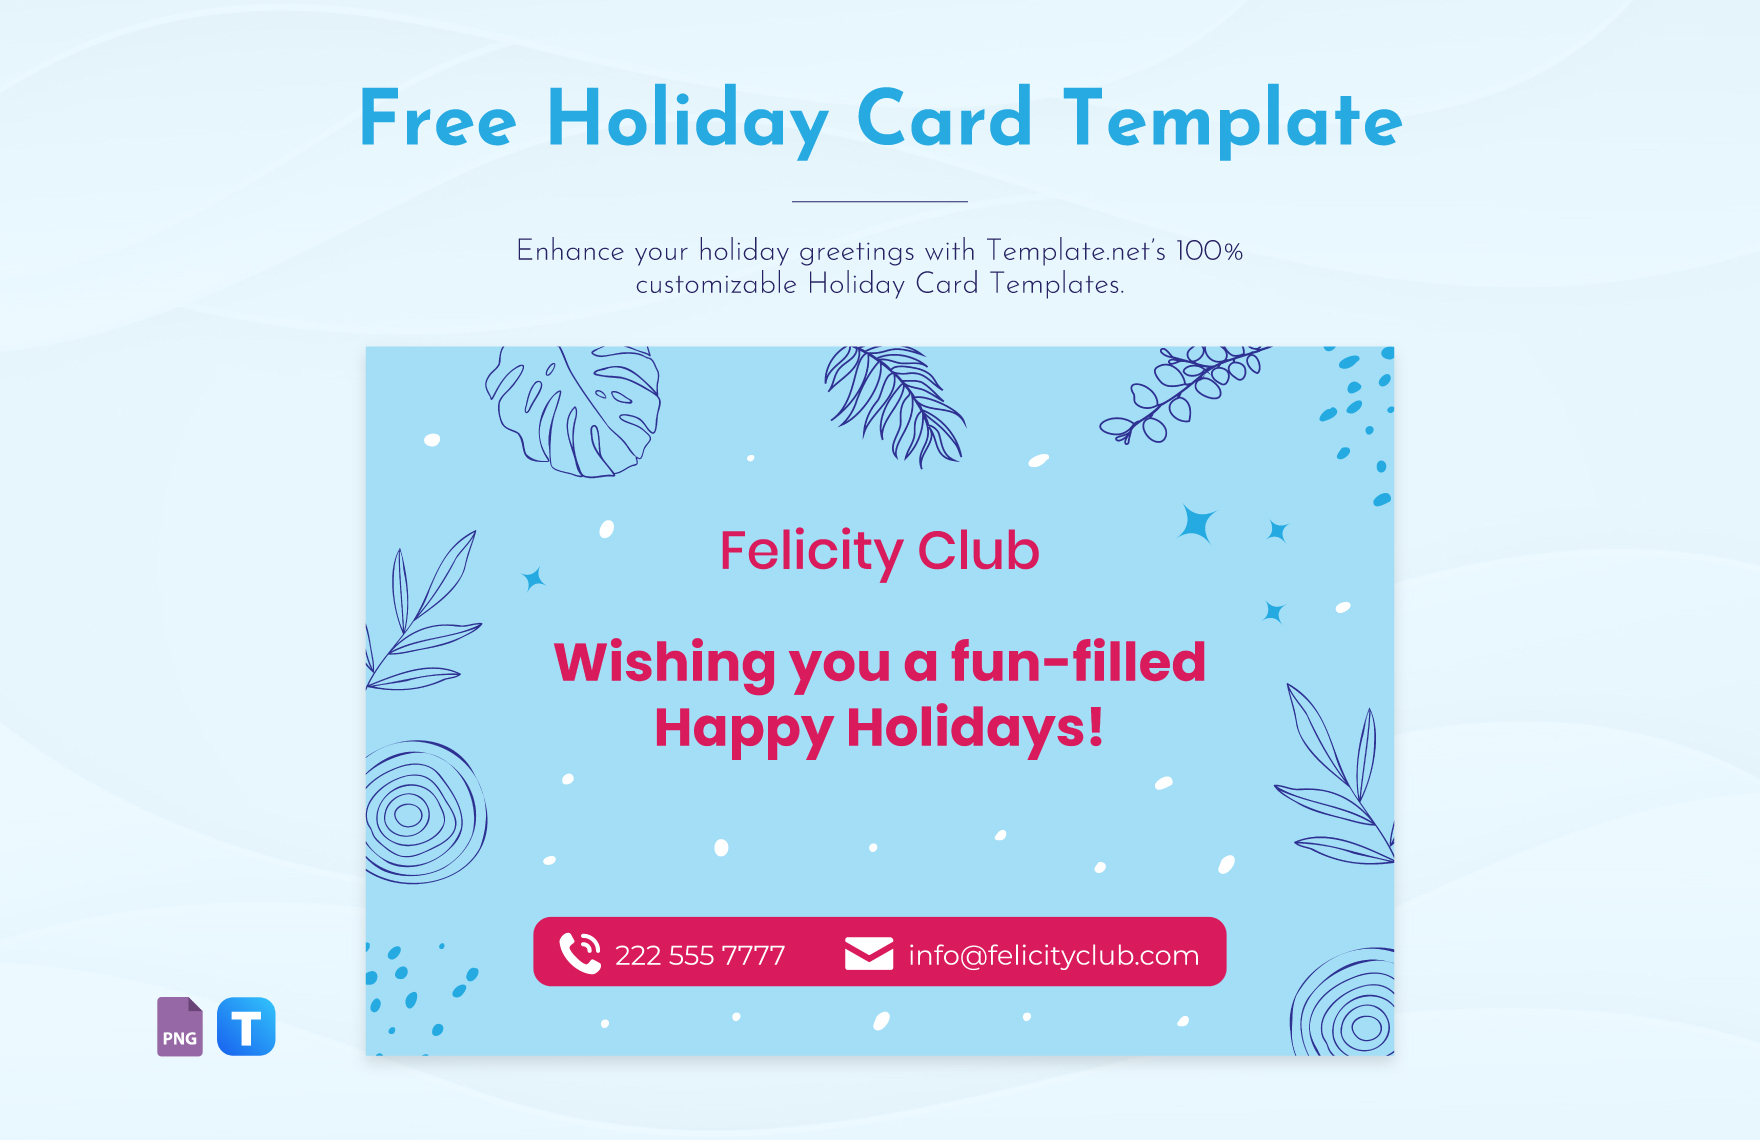 free-holiday-card-template-download-in-png-template